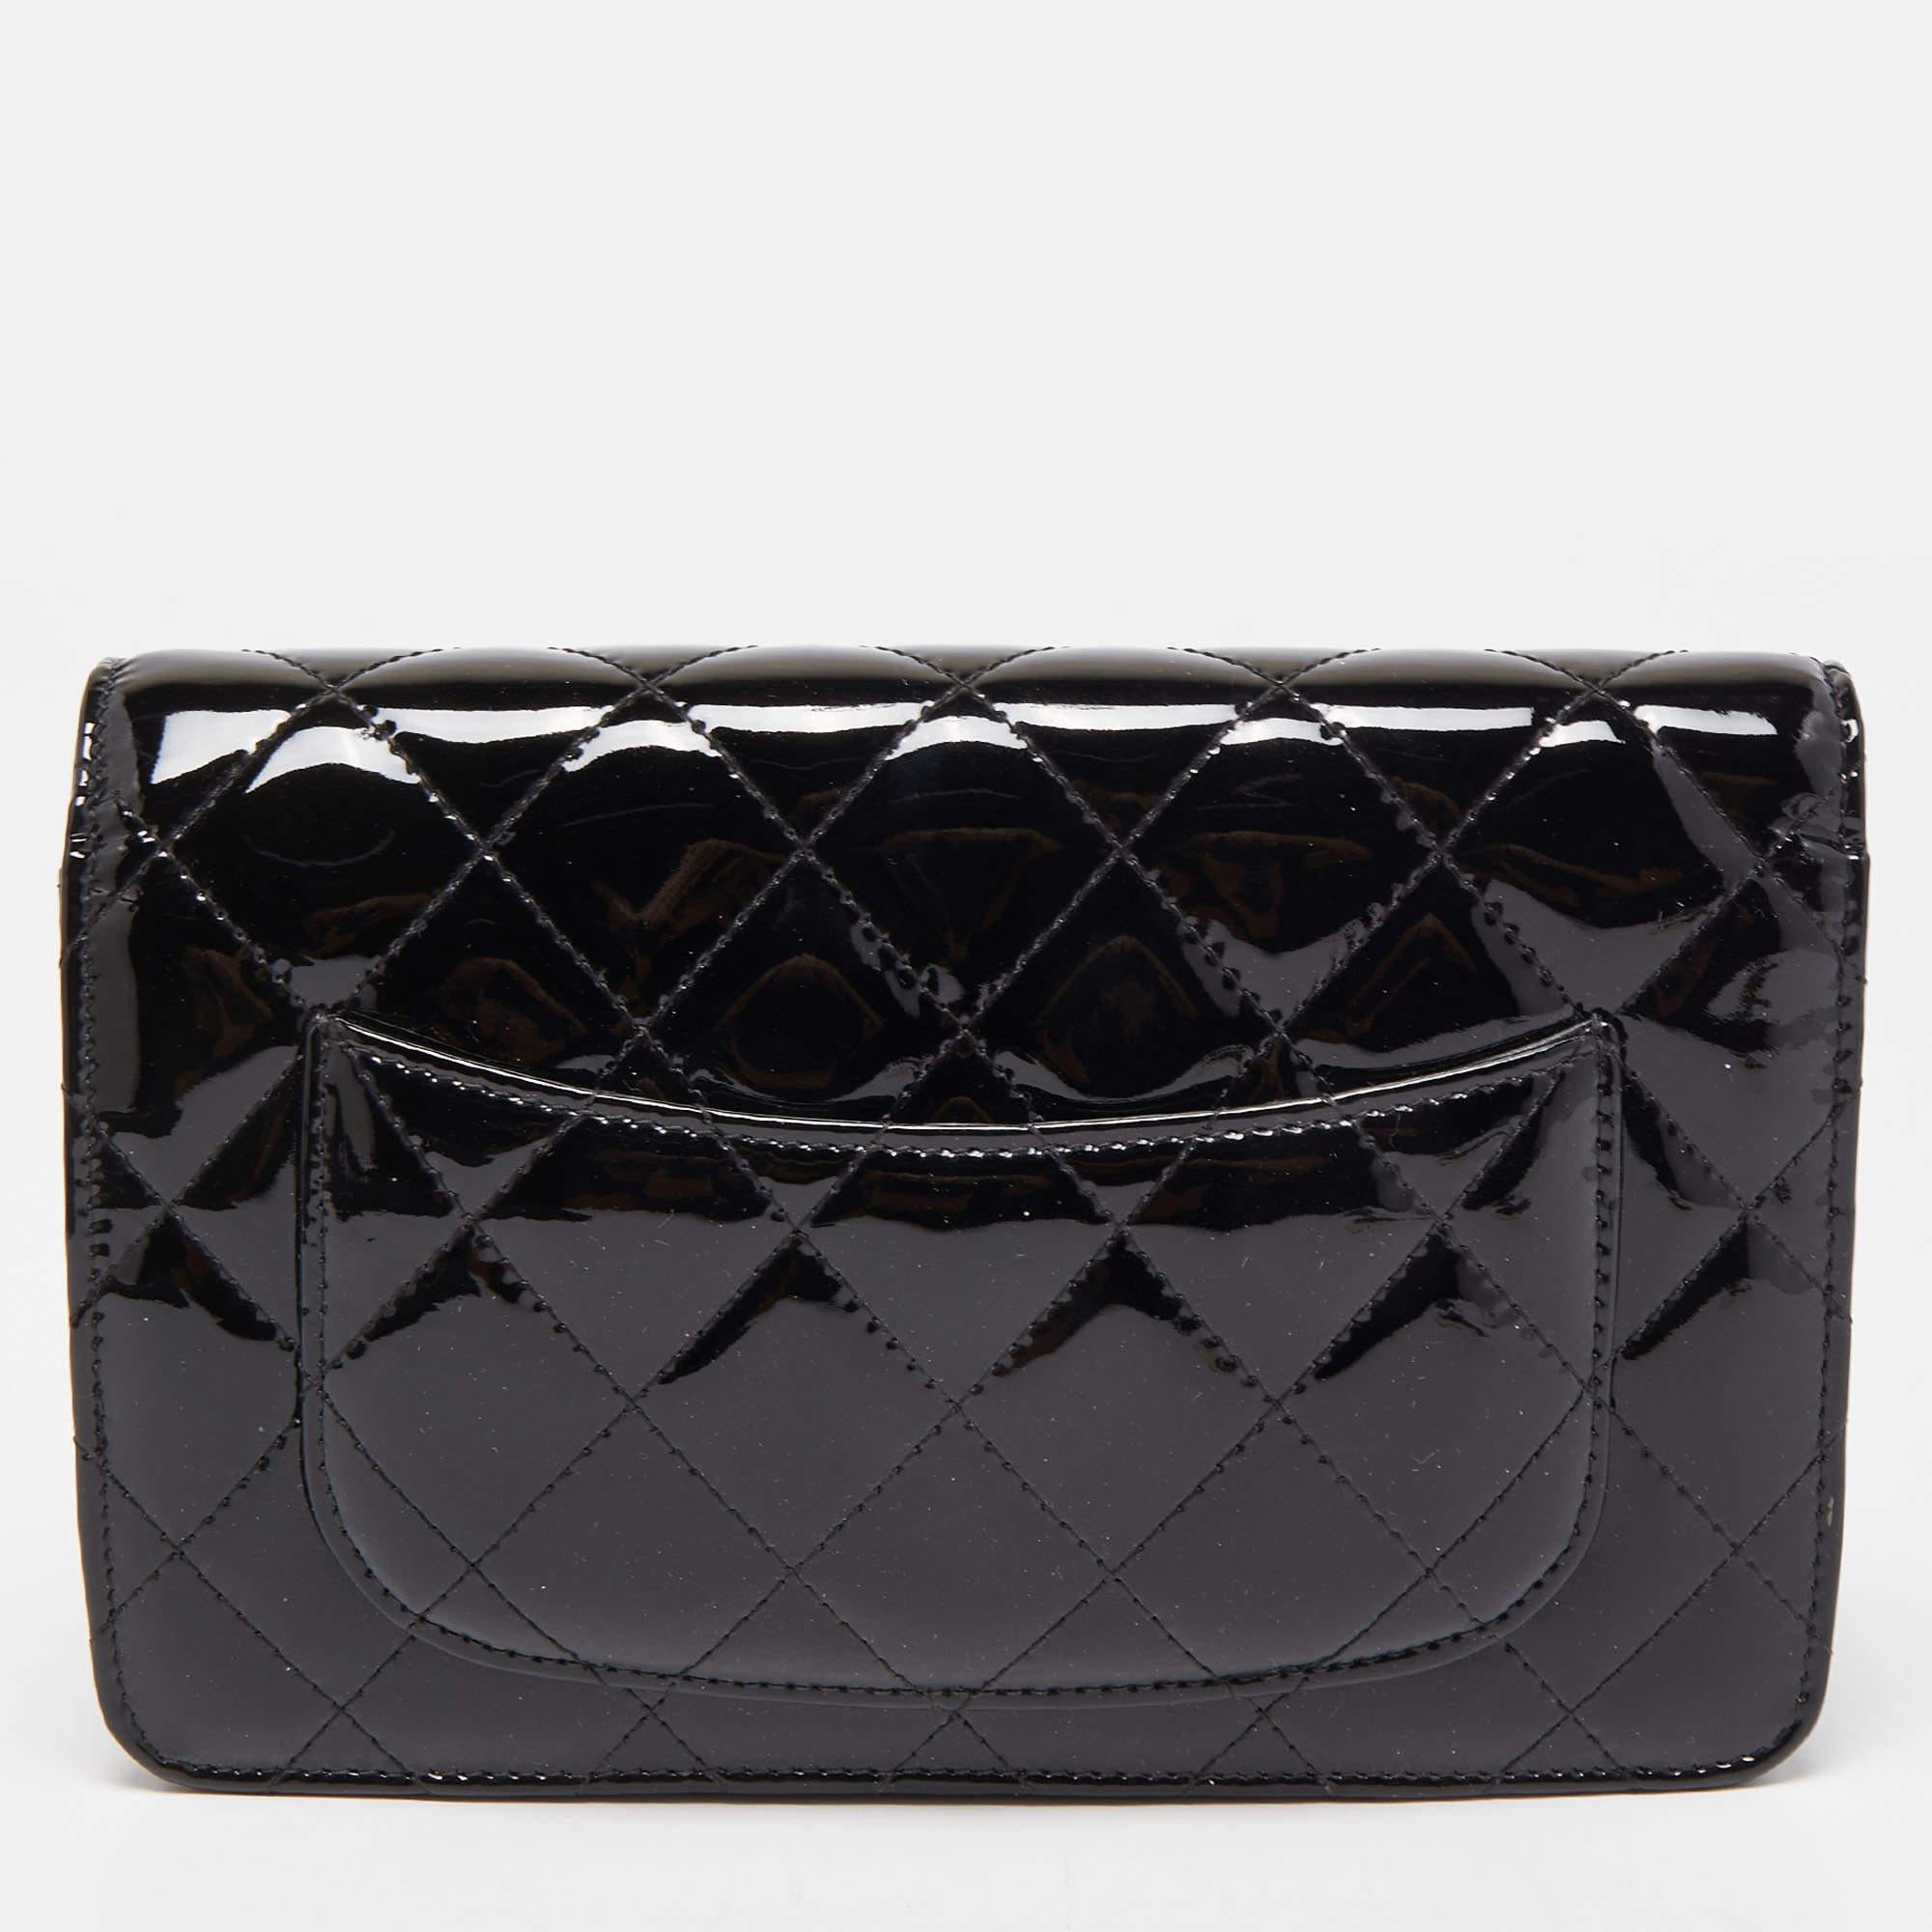 Trust this Chanel WOC to be light, durable, and comfortable to carry. Crafted from patent leather, it comes in a black shade. It features an ample interior, a long chain strap, and the CC logo at the front.

Includes: Authenticity Card, Info Booklet
